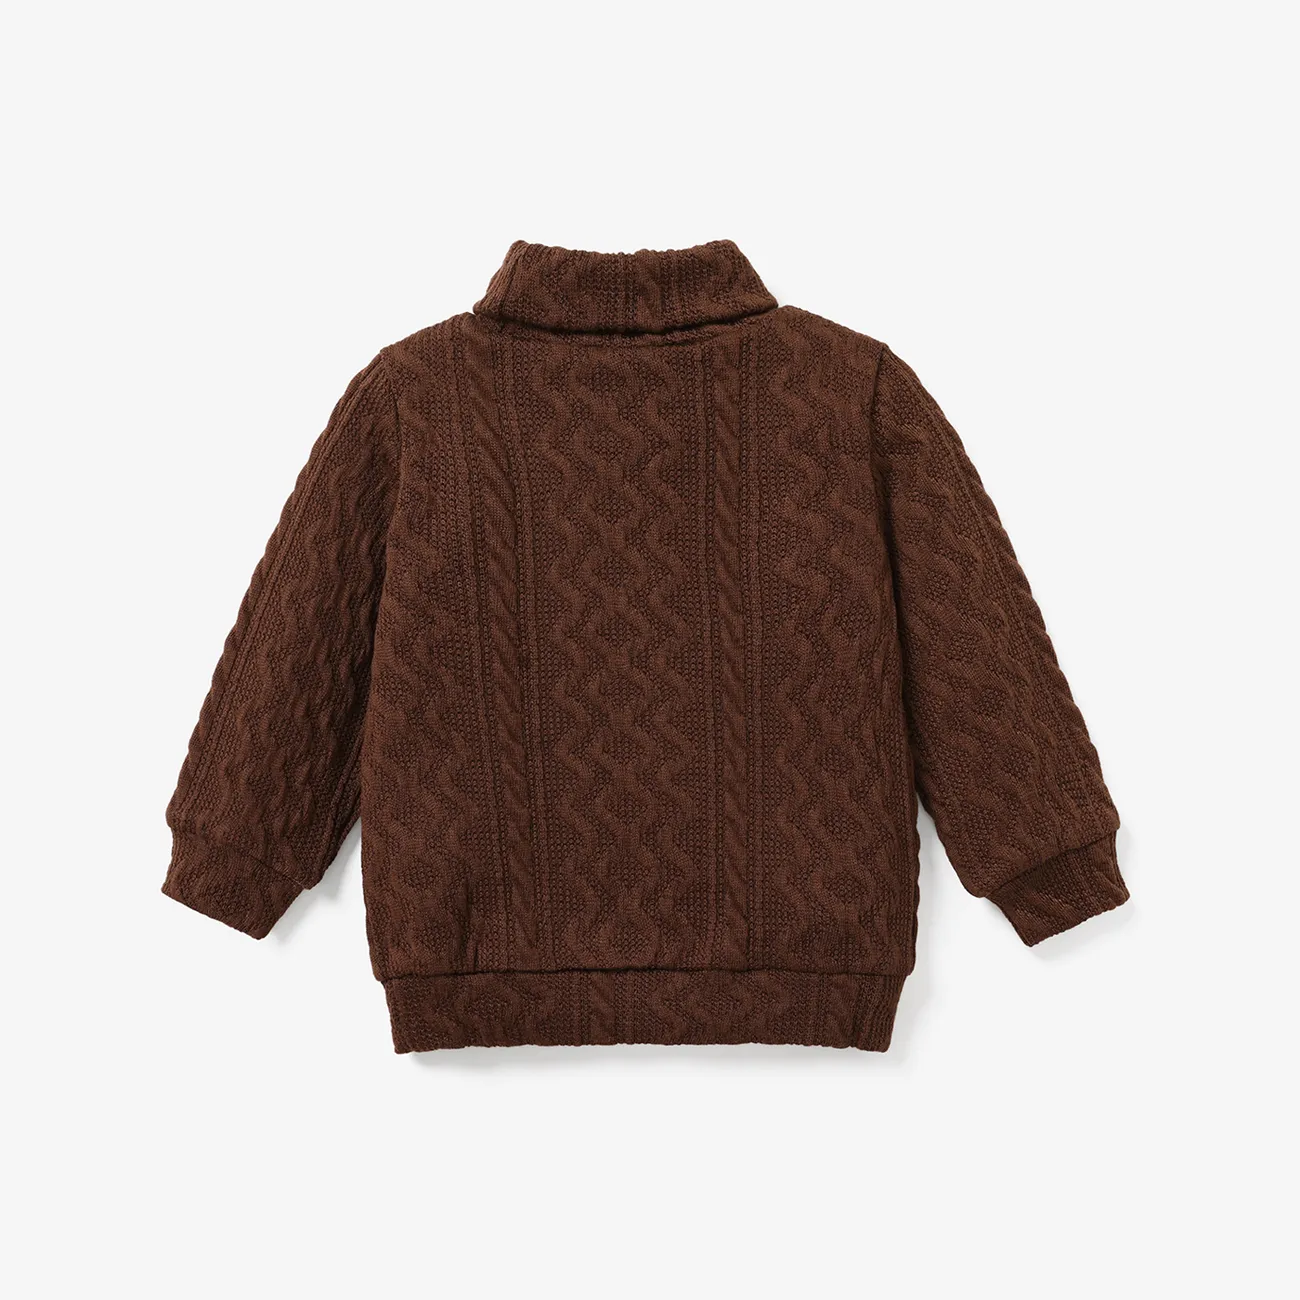 Toddler Boy Turtleneck Cable Knit Textured Sweater Brown big image 1